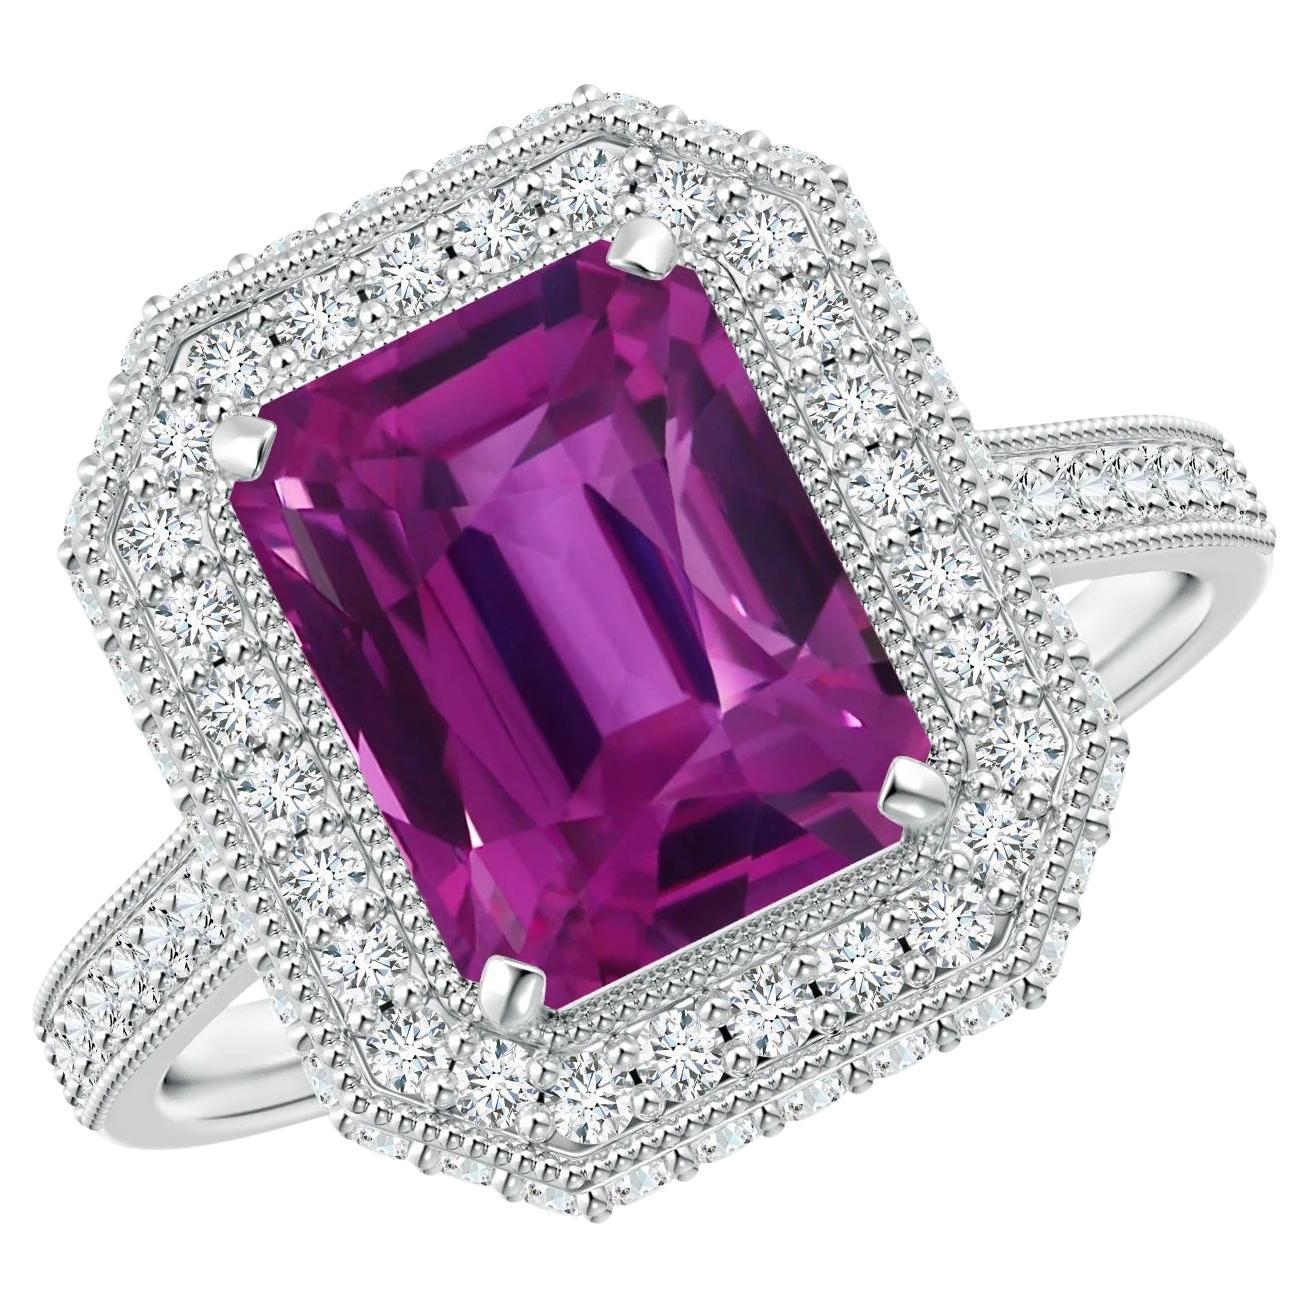 For Sale:  ANGARA GIA Certified Natural Emerald Cut Pink Sapphire Halo Ring in White Gold